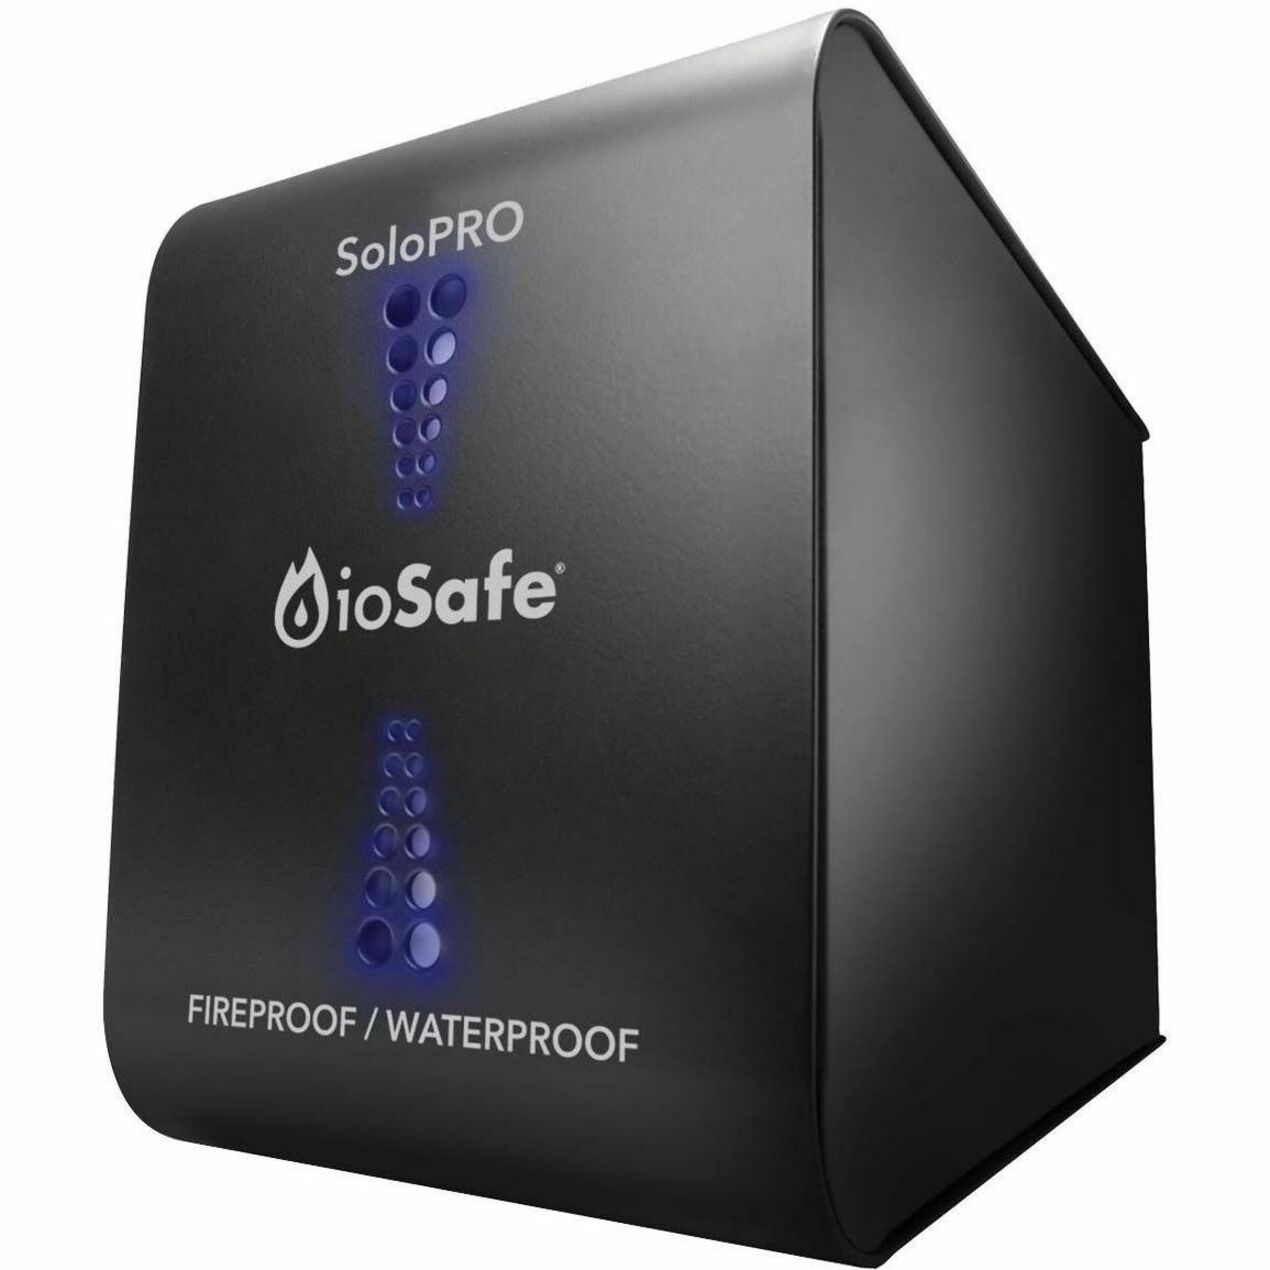 ioSafe SoloPRO External Hard Drive - 2TB Storage Capacity [Discontinued]